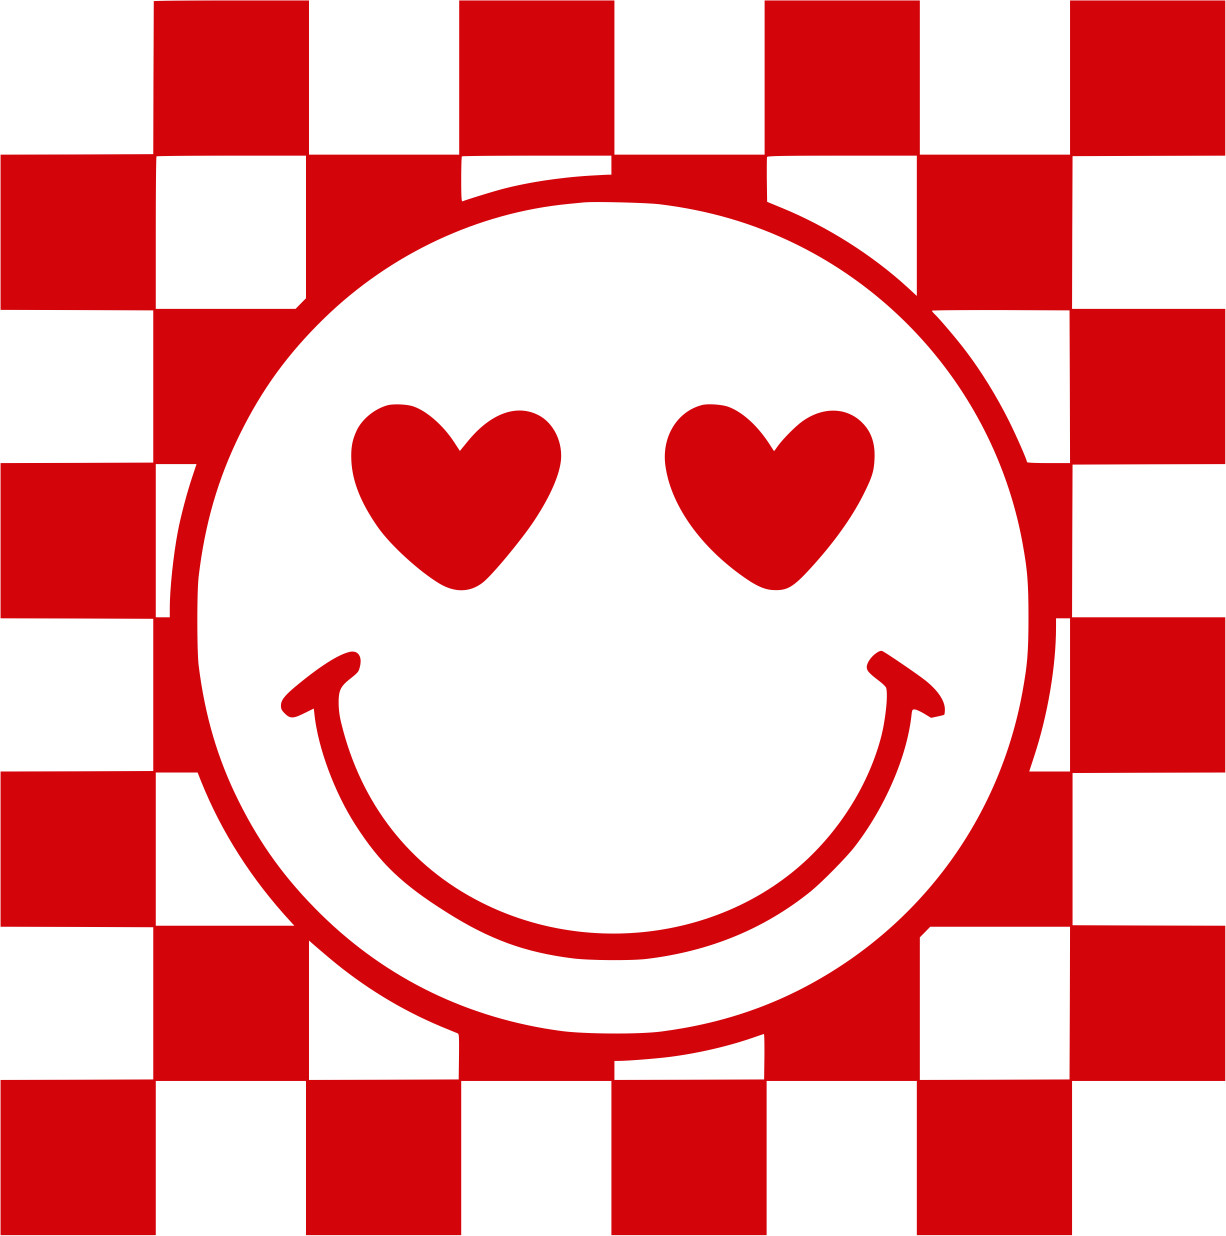 VALENTINE'S DAY PRINT 57 - Checkers Smiley - Red